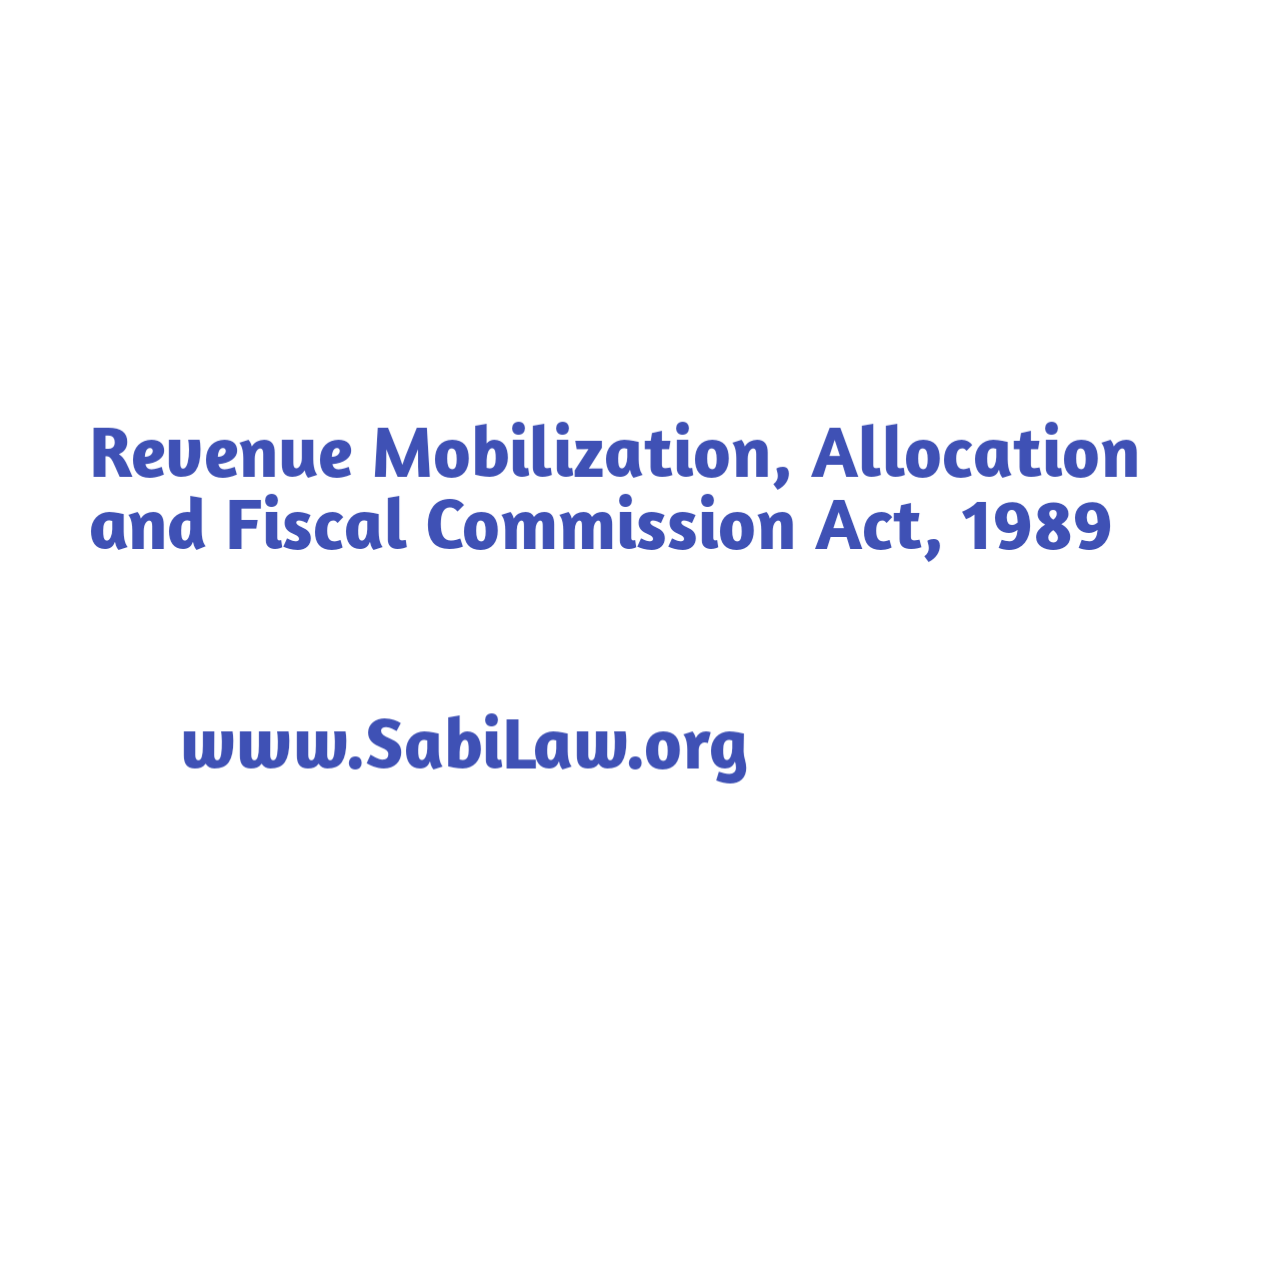 Click to download the Revenue Mobilization, Allocation and Fiscal Commission Act. 1989